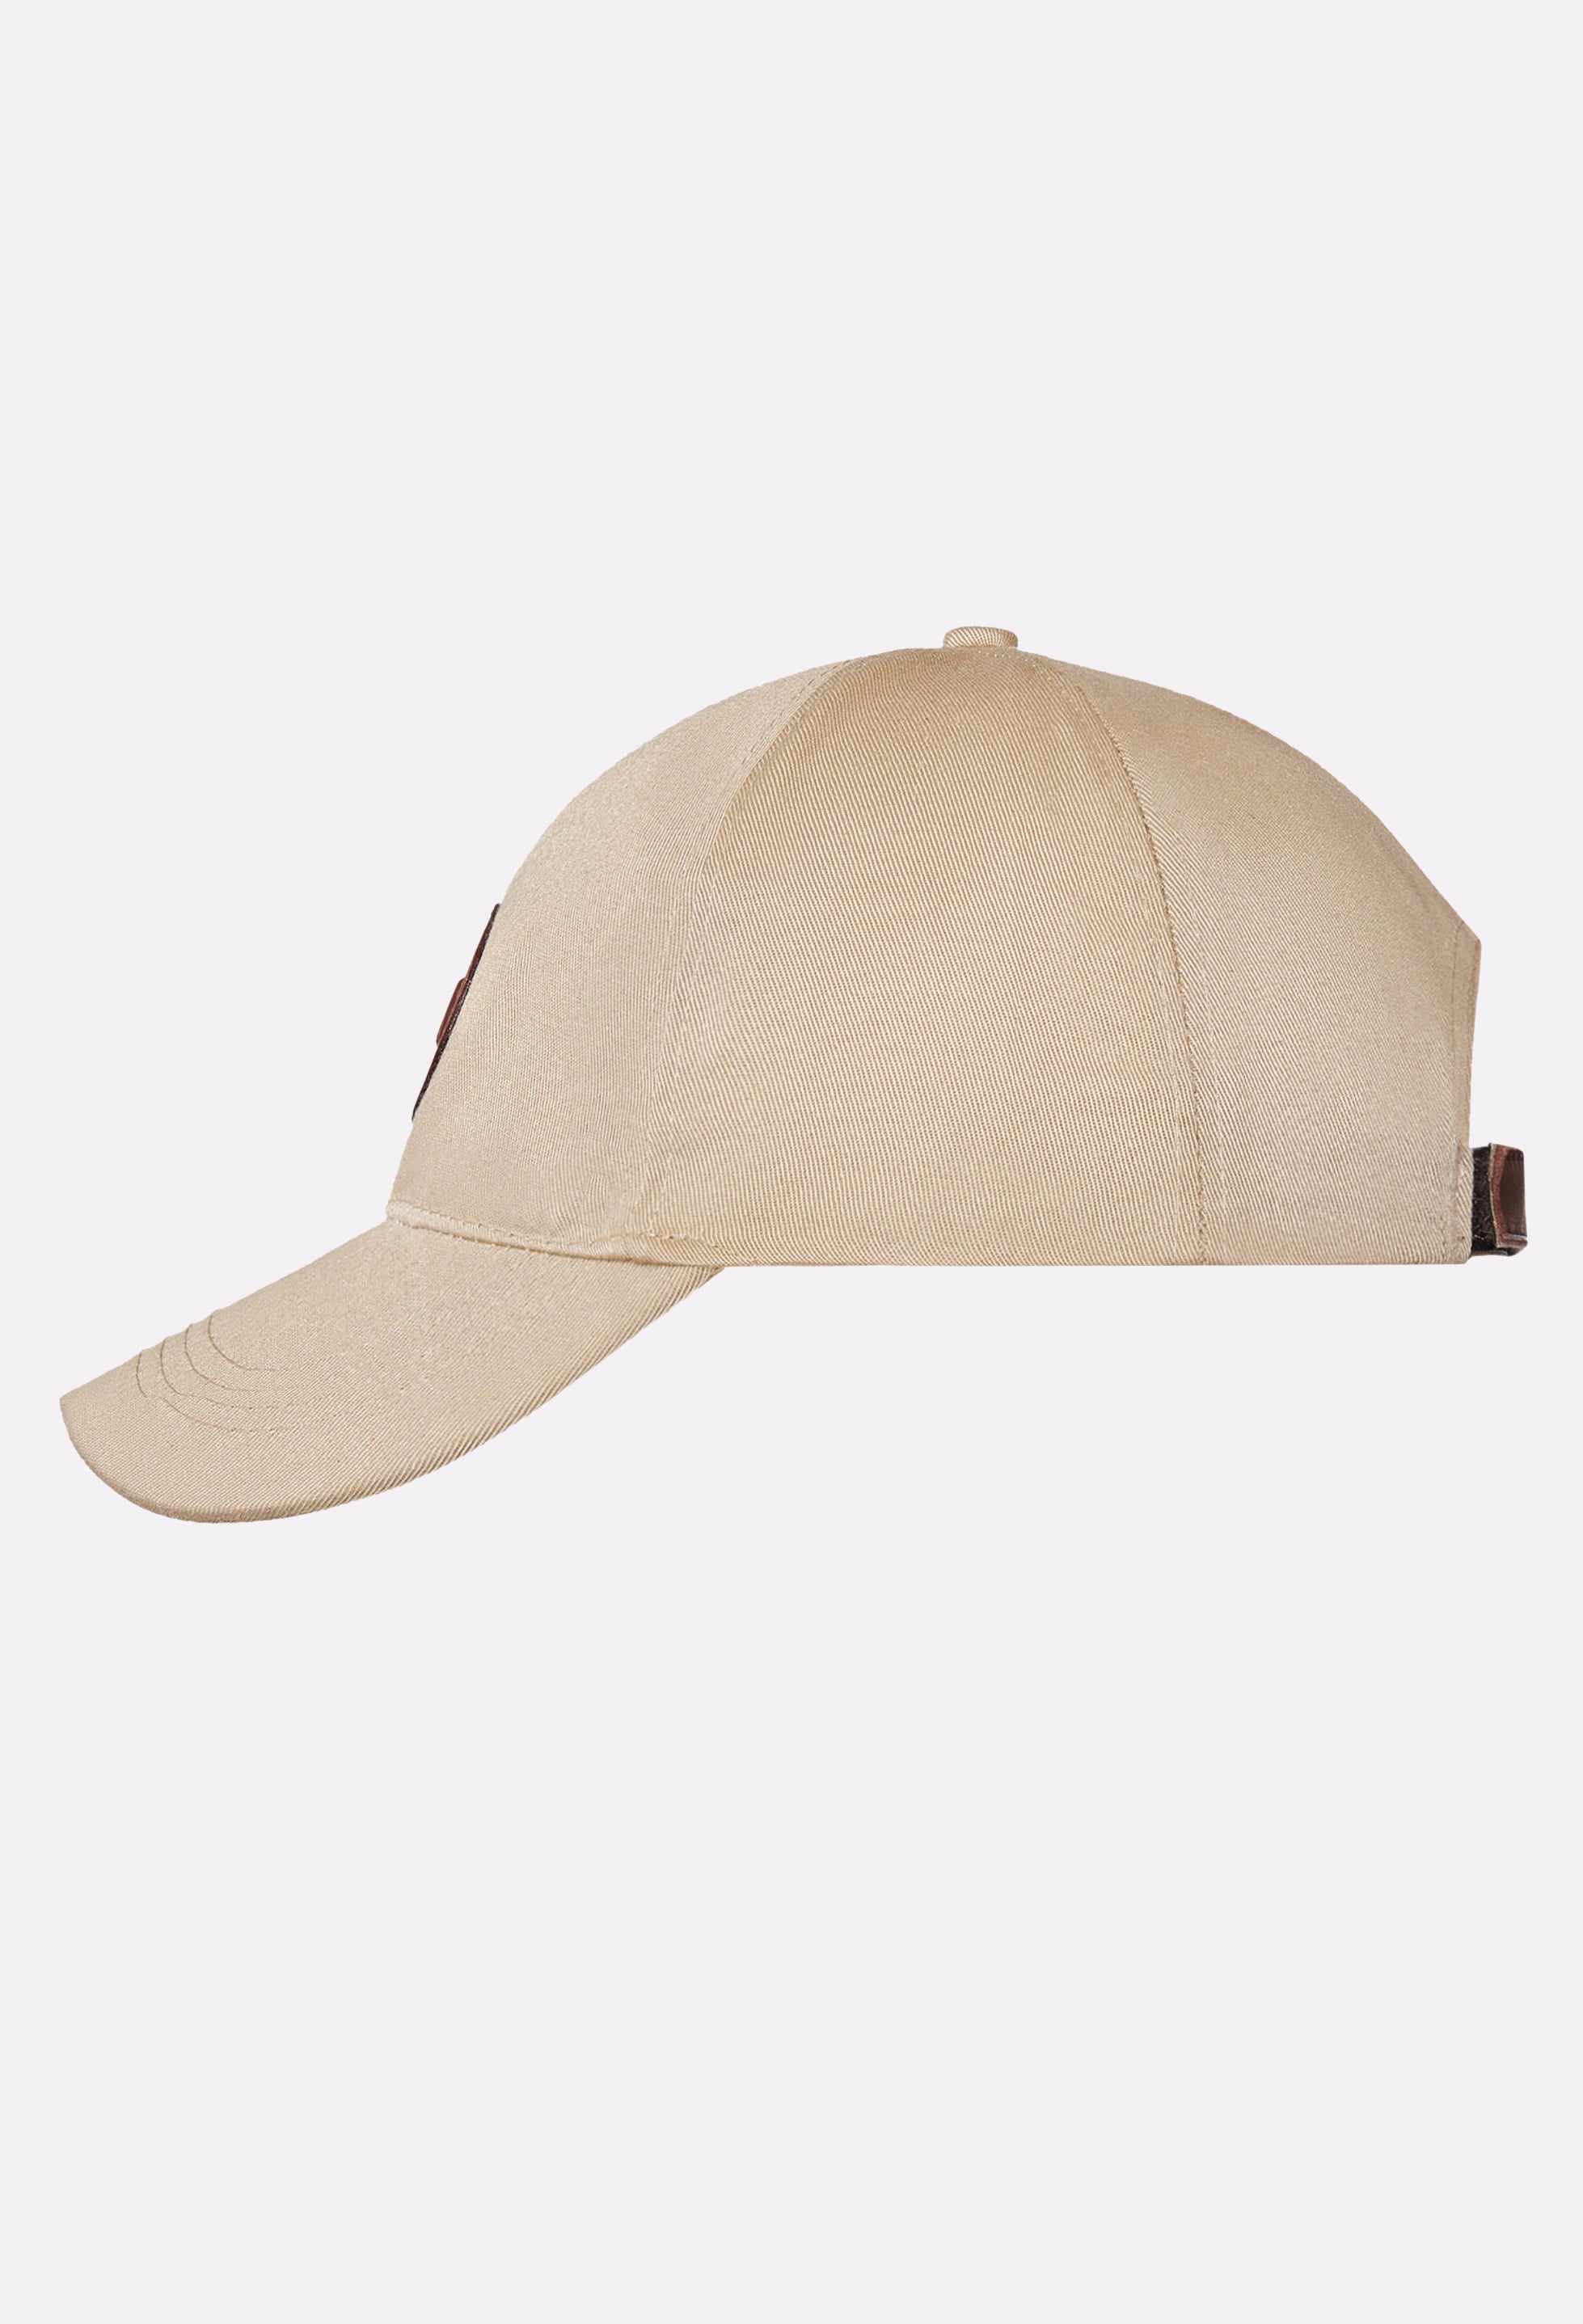 Side of a Beige Baseball Cap with a Patched Leather Lazaro Logo and a leather adjustable strap.